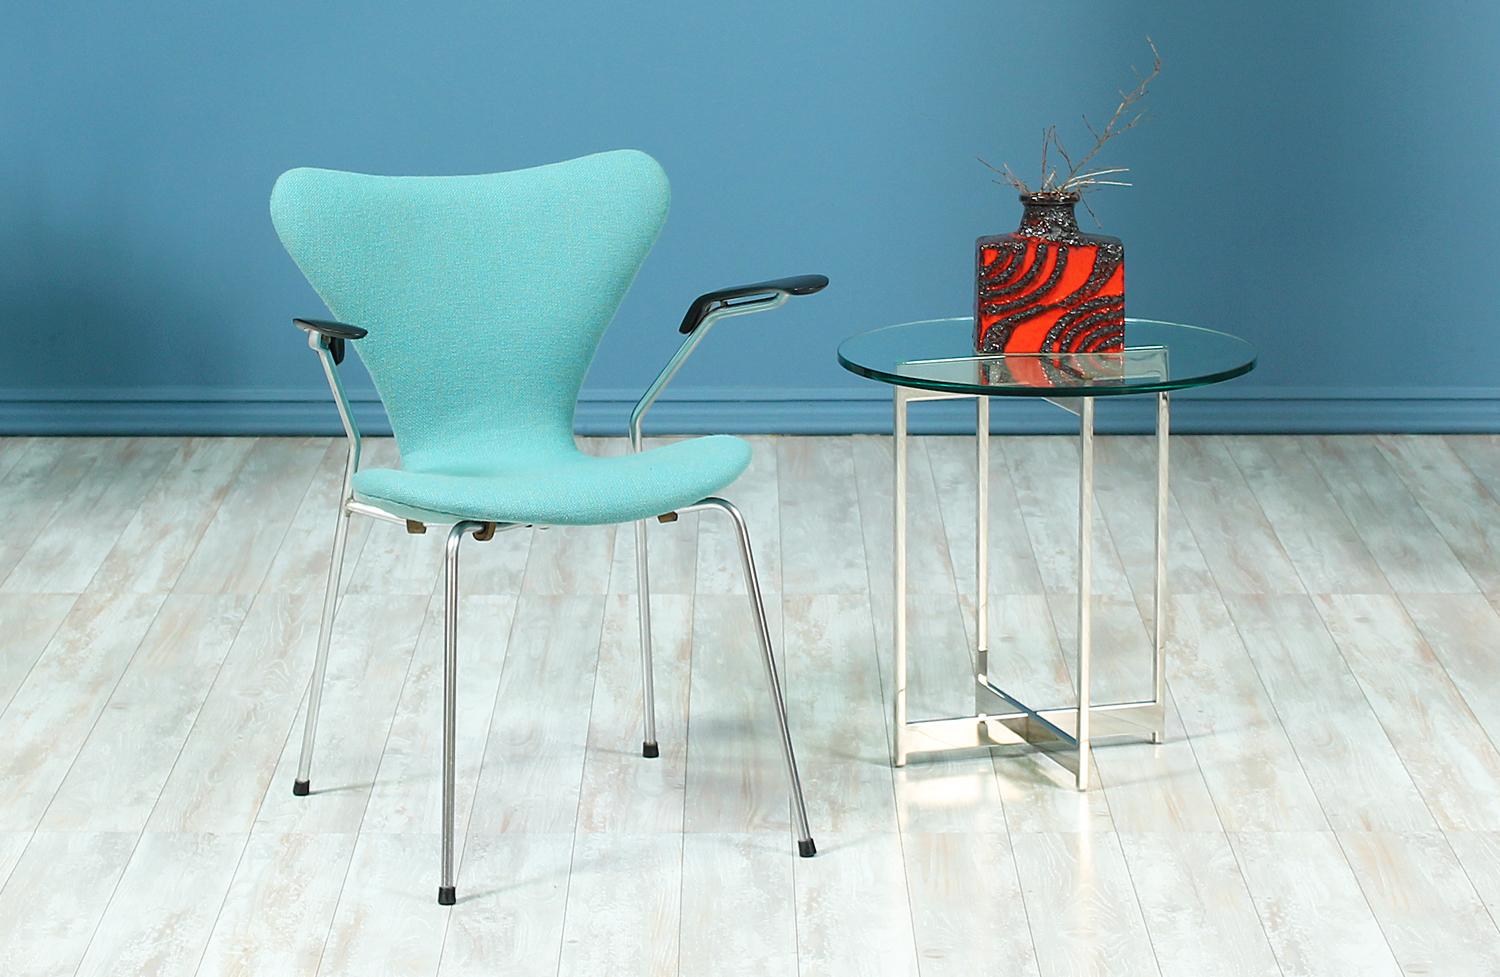 Series-7 Desk Chair designed by Arne Jacobsen for Fritz Hansen in Denmark circa 1950’s. Worldly recognized as one of Jacobsen’s most iconic designs, this chair features a chromed steel body newly upholstered in a soft cyan blue tweed fabric with